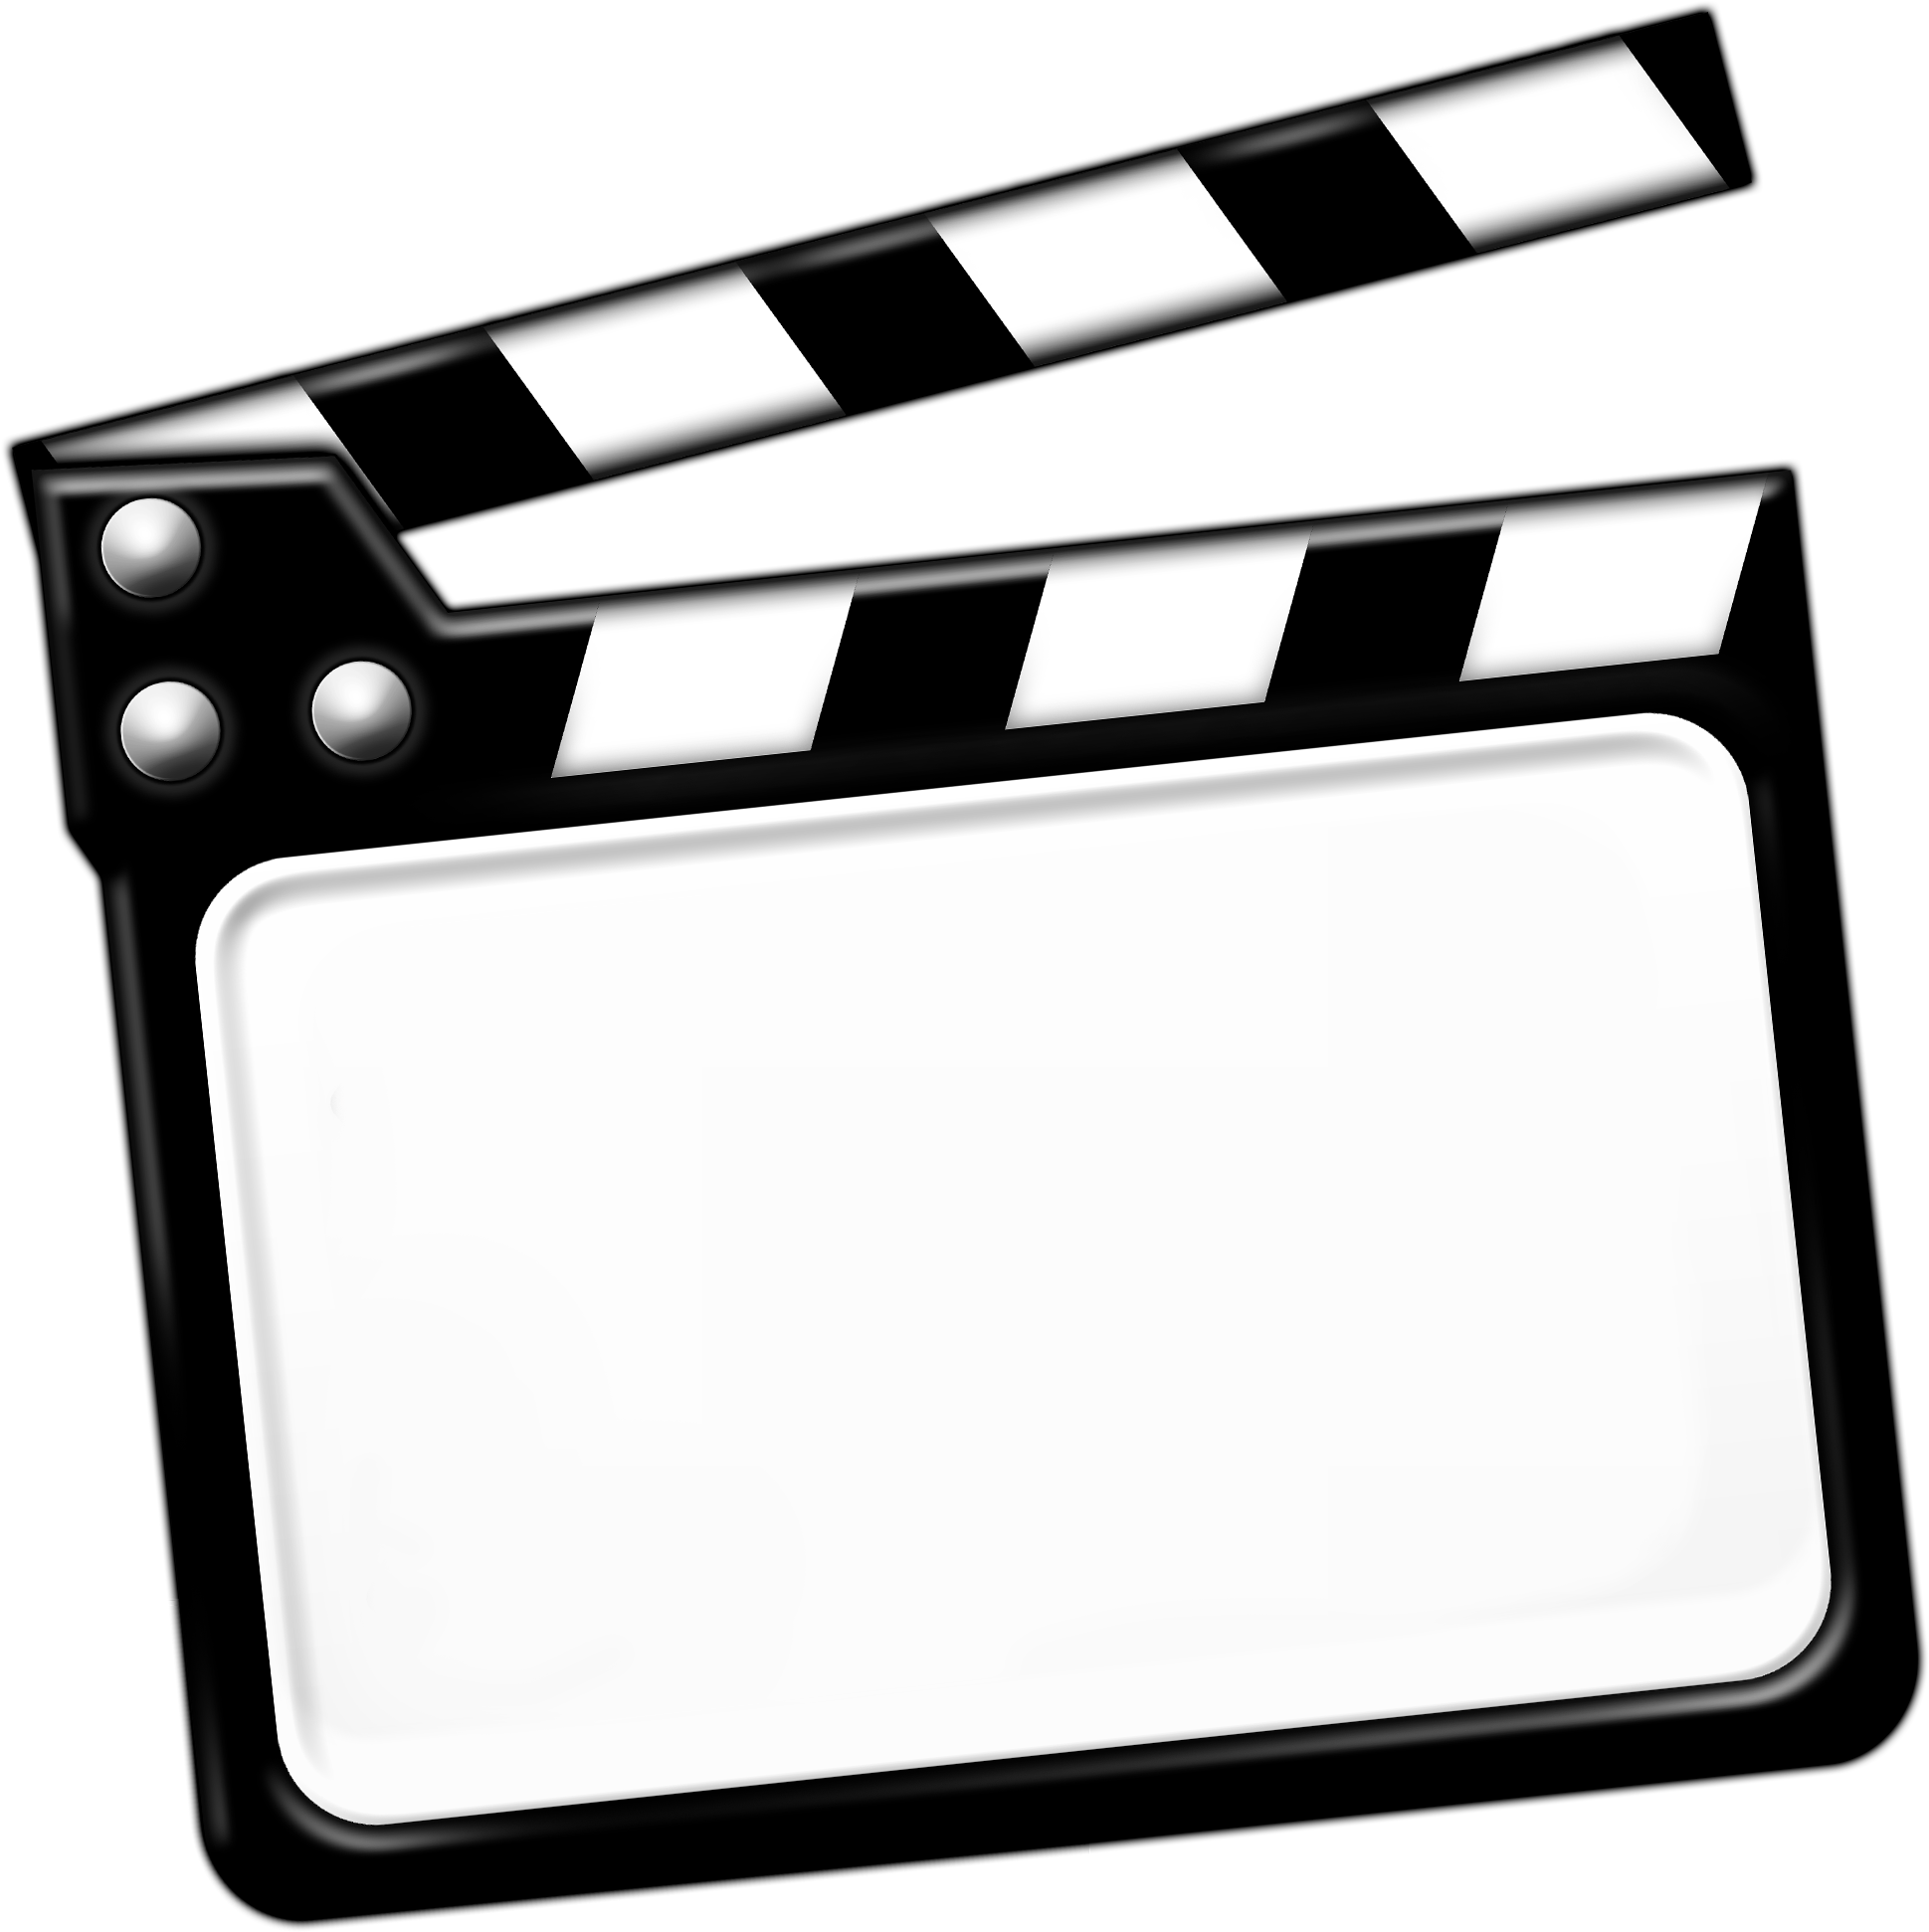 Media Player Classic Mpc No Shadow No Numbers - Media Player Classic Icon (2048x2048)